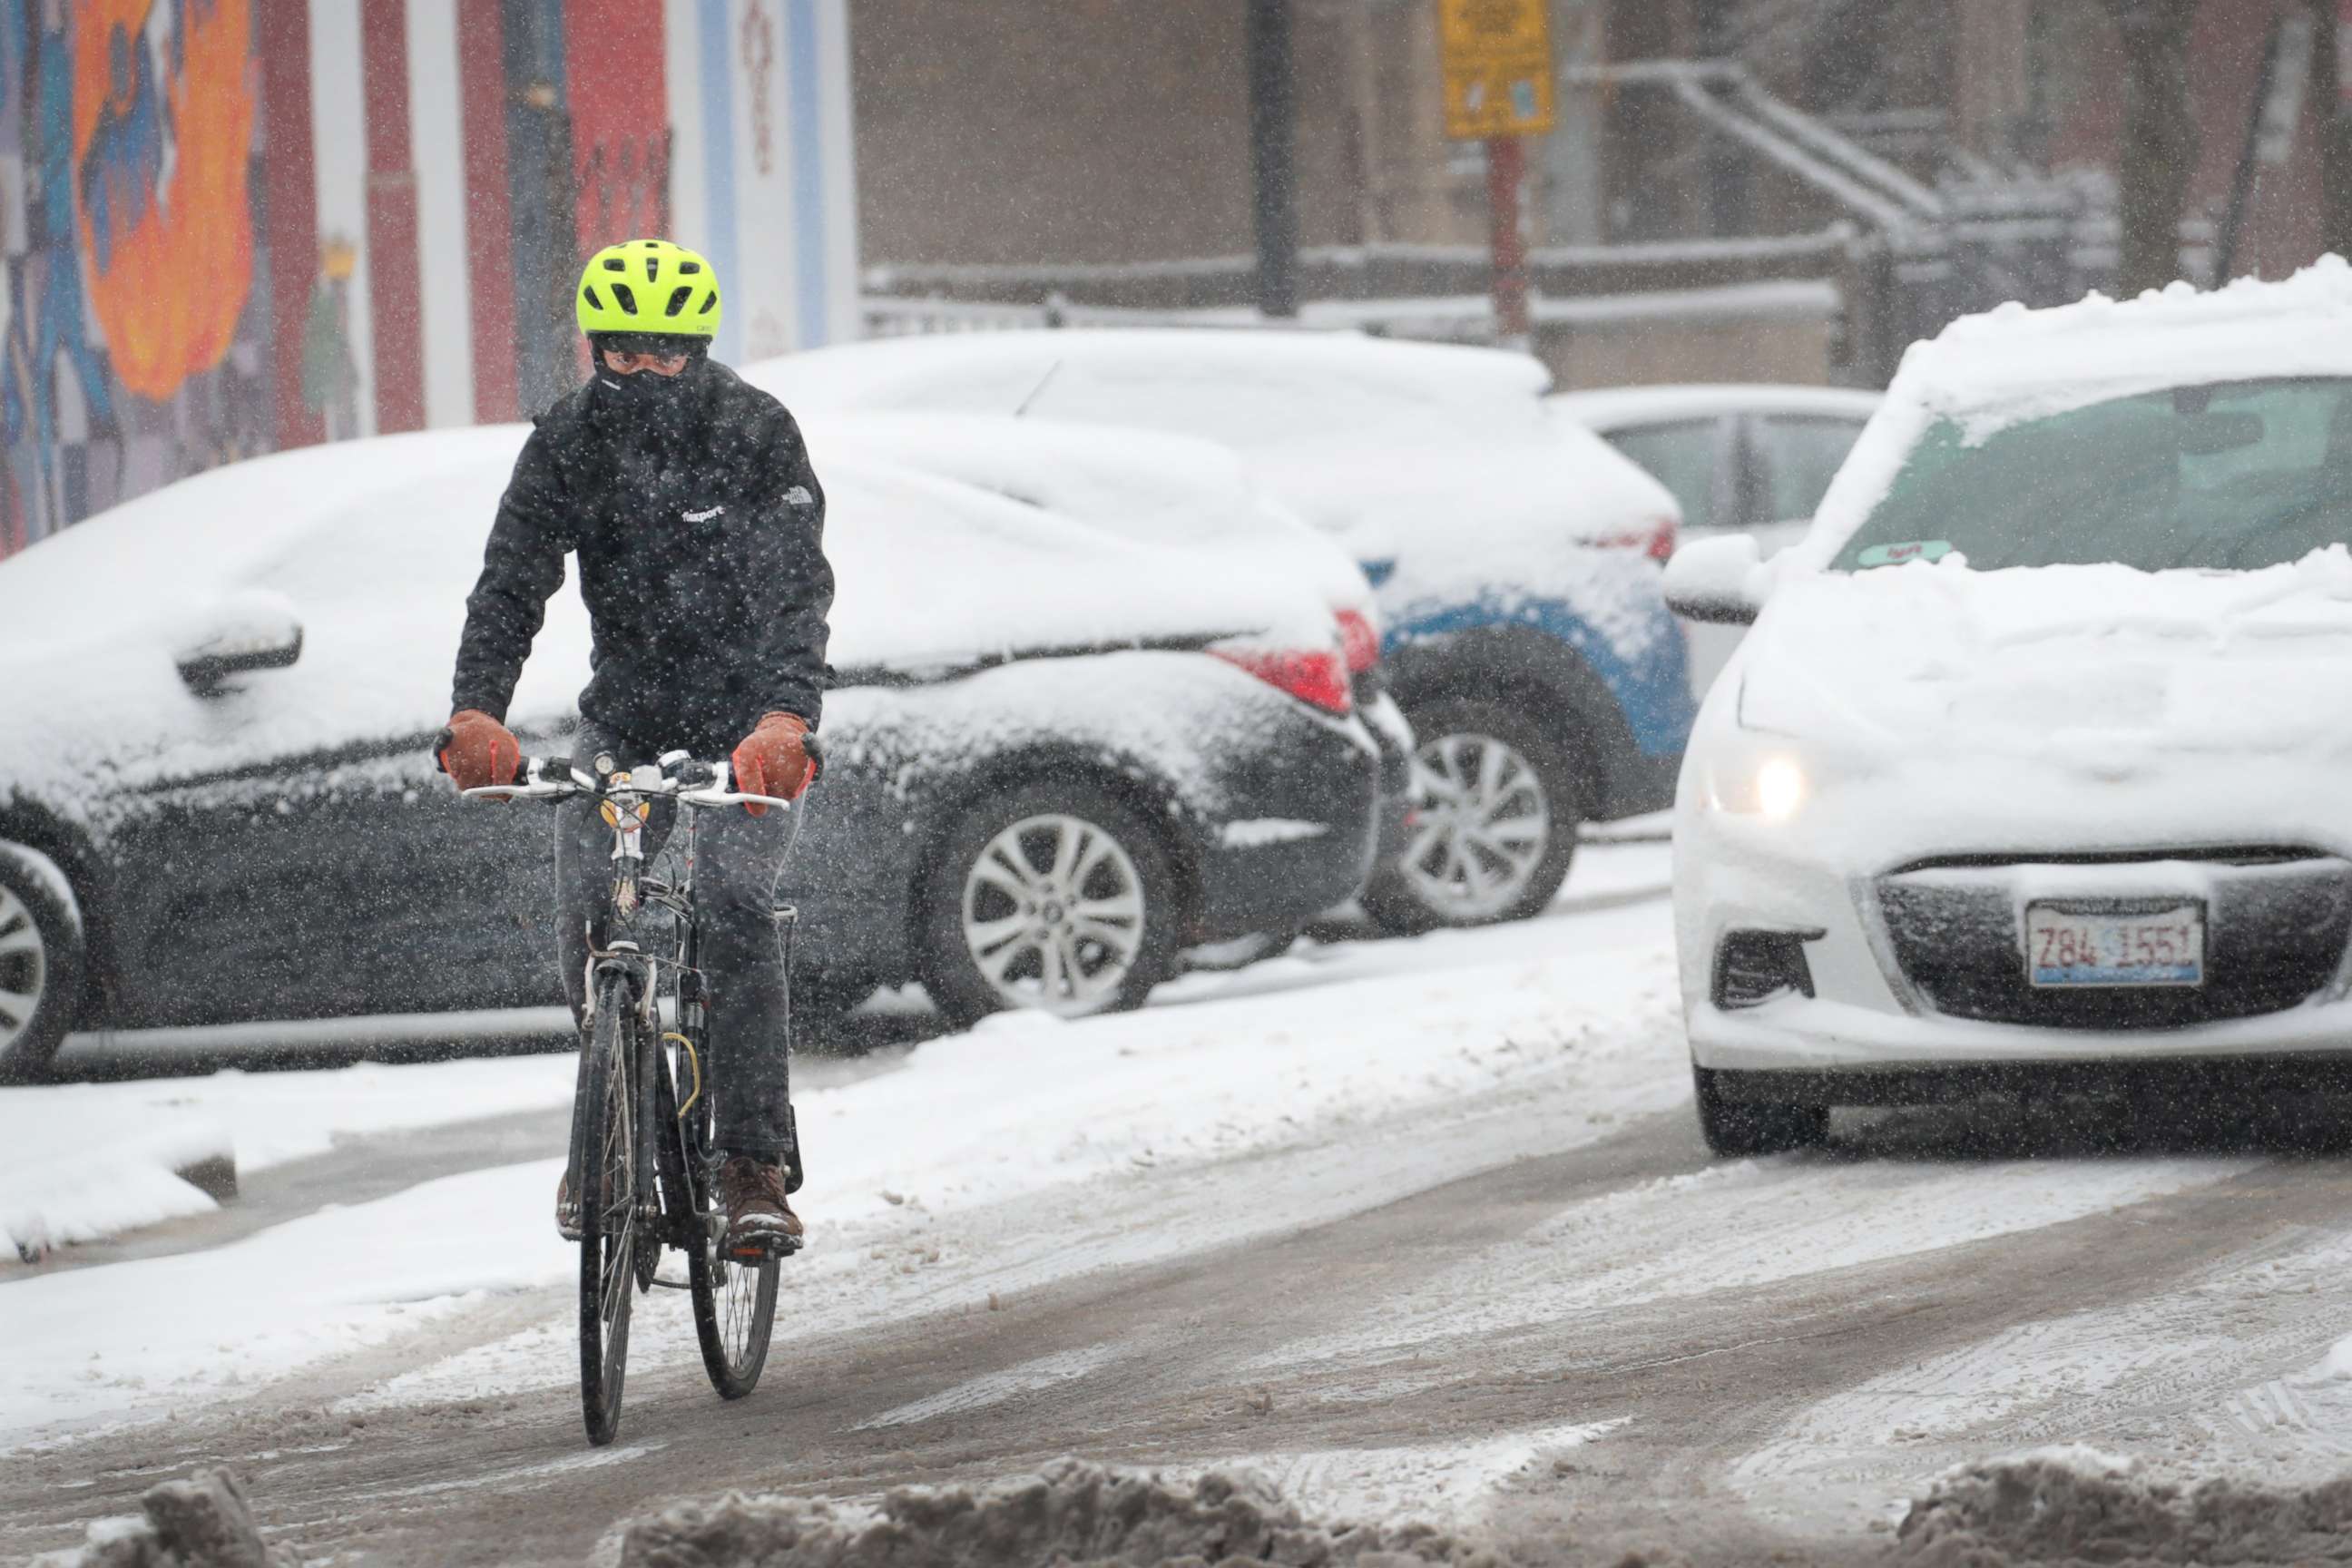 PHOTO: A cyclist navigates a snow-covered street in the Humboldt Park neighborhood, Nov. 11, 2019, in Chicago.